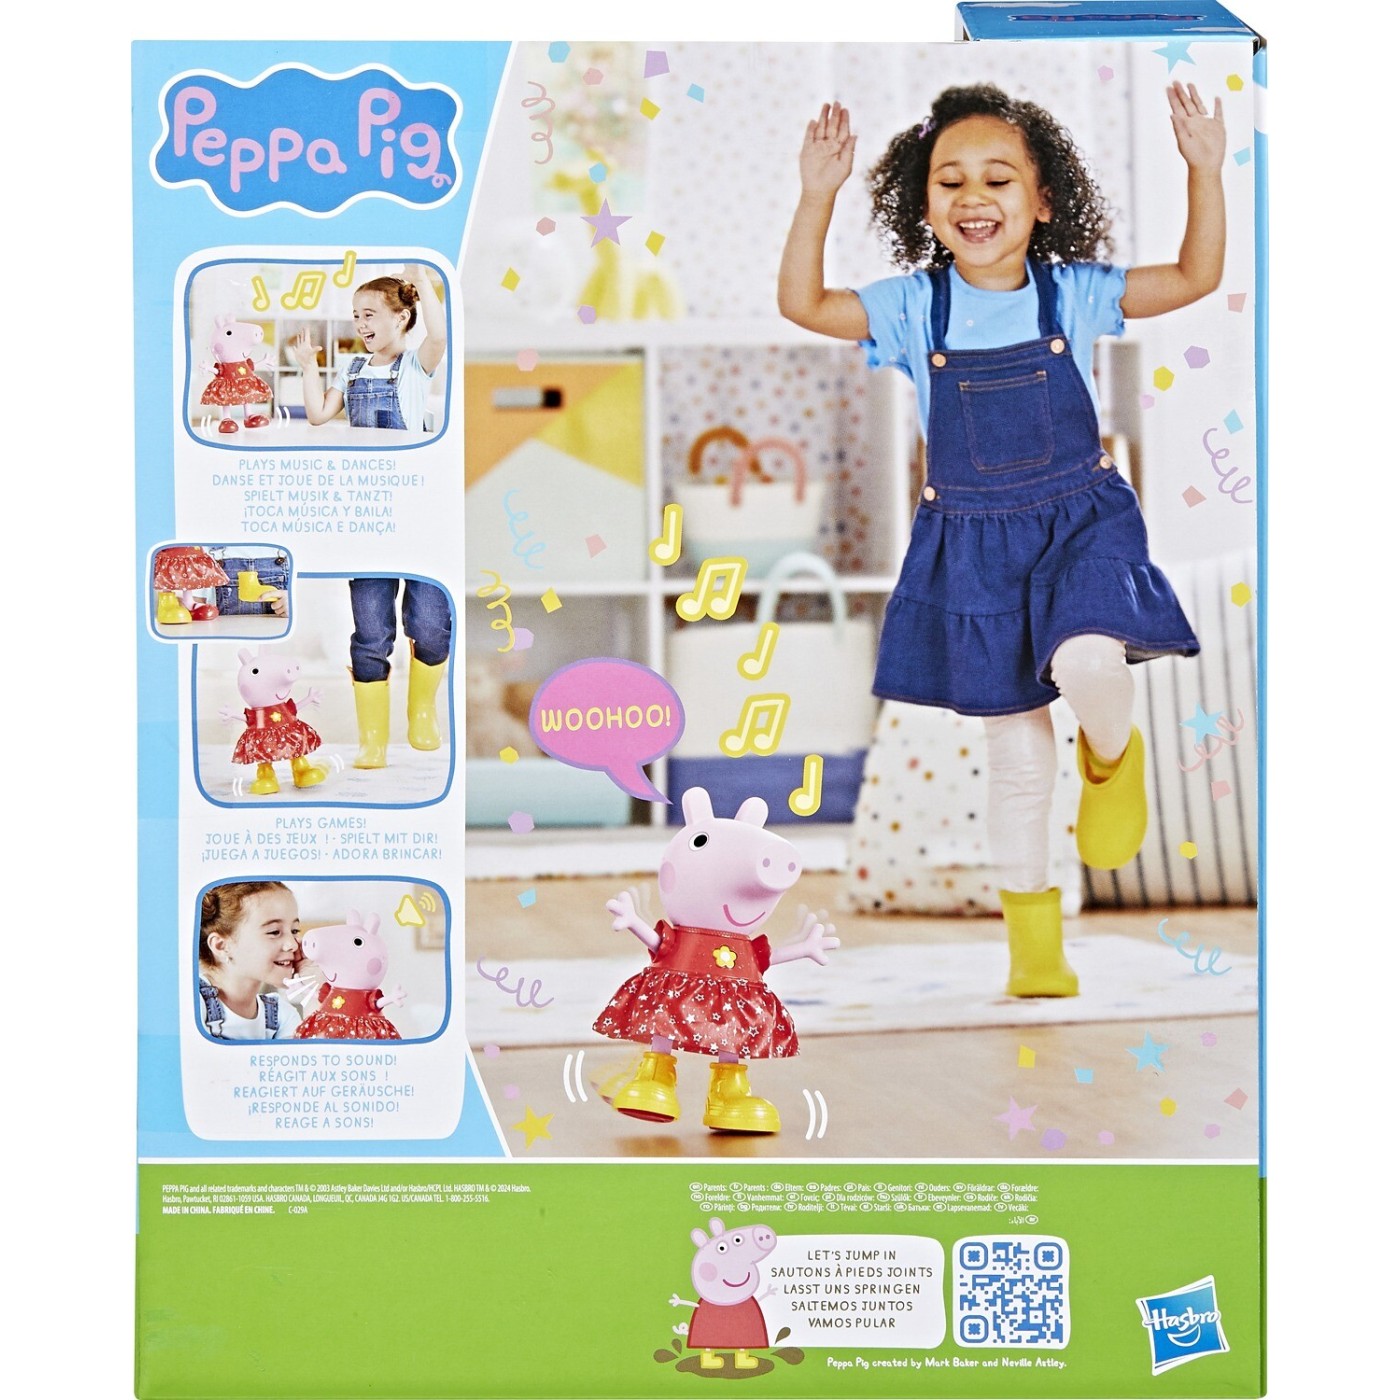 Hasbro Peppa Pig Peppas Muddy Puddles Party Musical Dancing Διαδραστική Κούκλα (F8873)